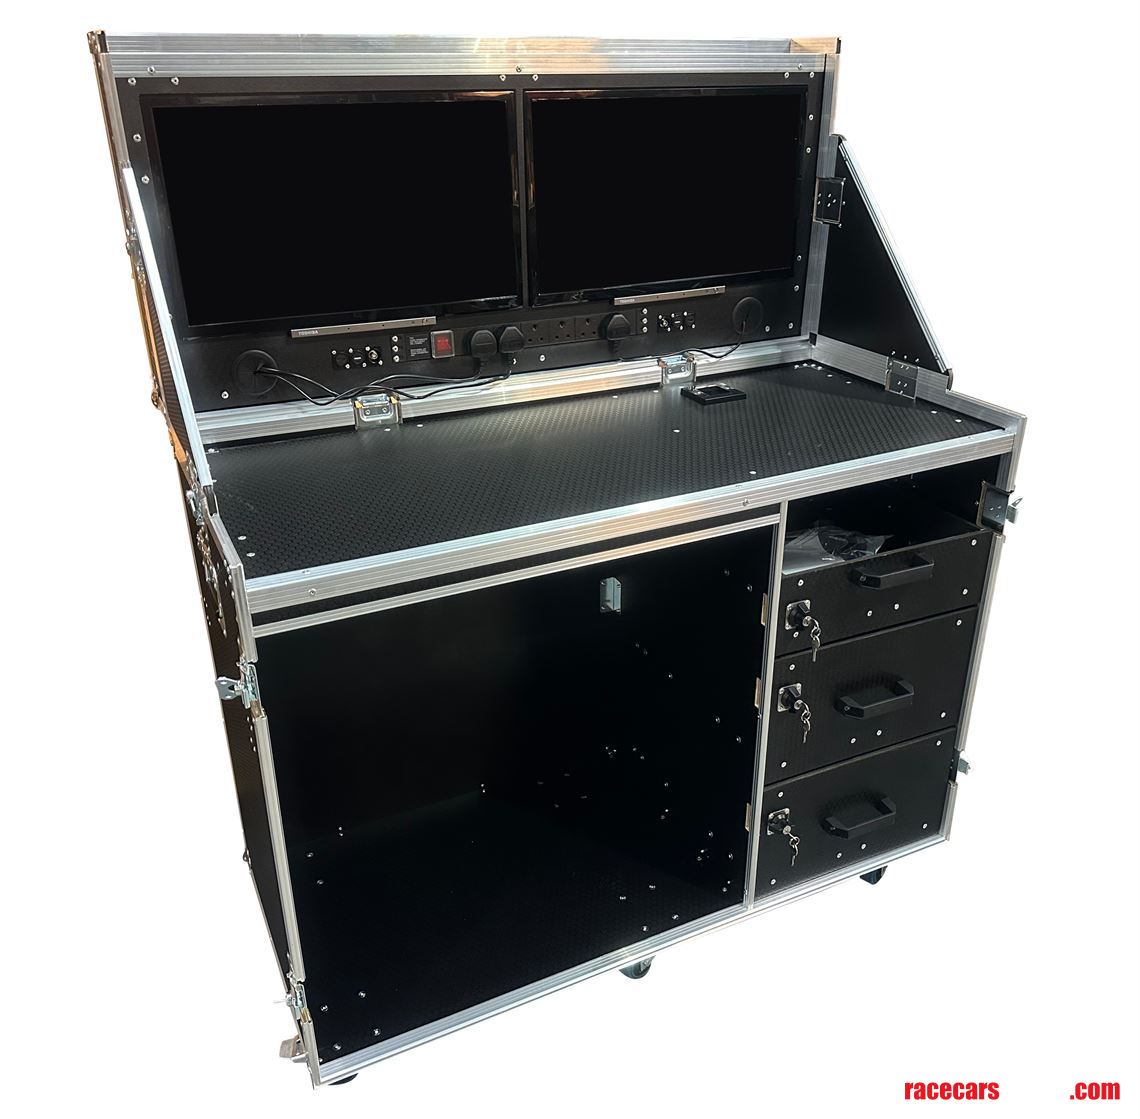 data-station-flight-case-with-screens-vme-dat